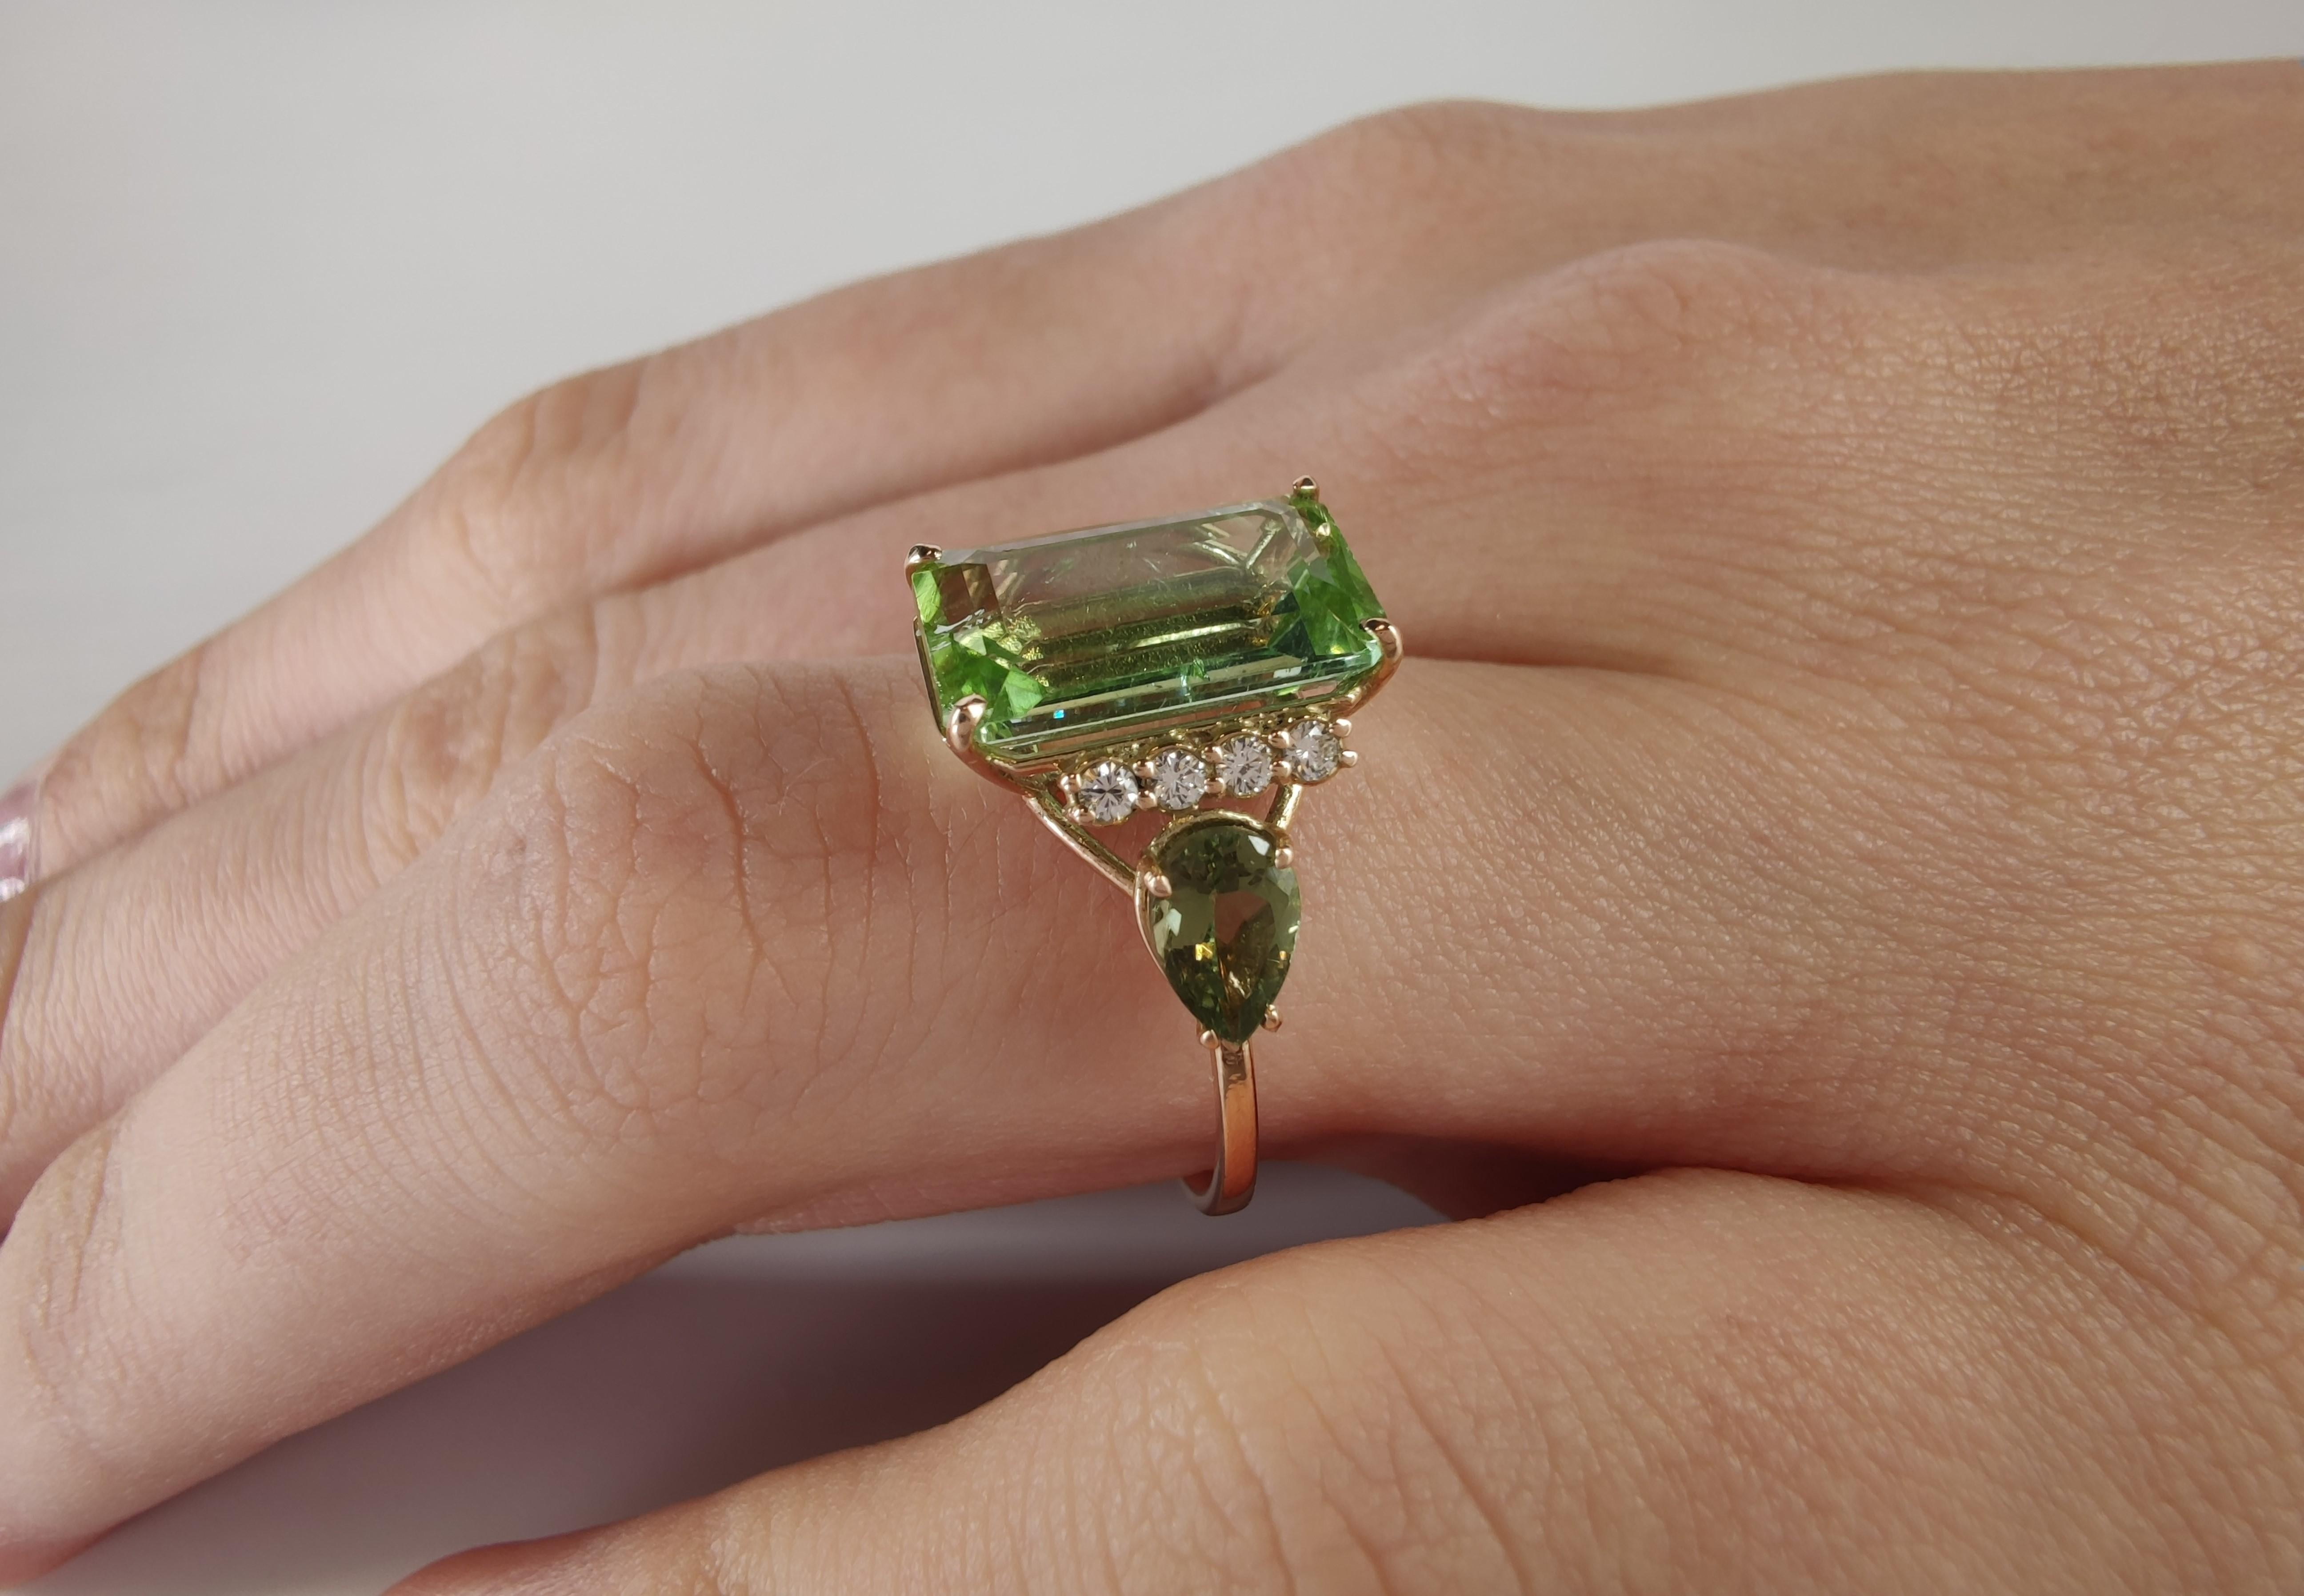 We craft distinctive, one-of-a-kind rings, placing emphasis on design, going beyond the conventional norms of jewelry.

Perfect for your special occasion, this stunning Genuine Certified Light Green Tourmaline and Diamond 14K Gold Cocktail Ring is